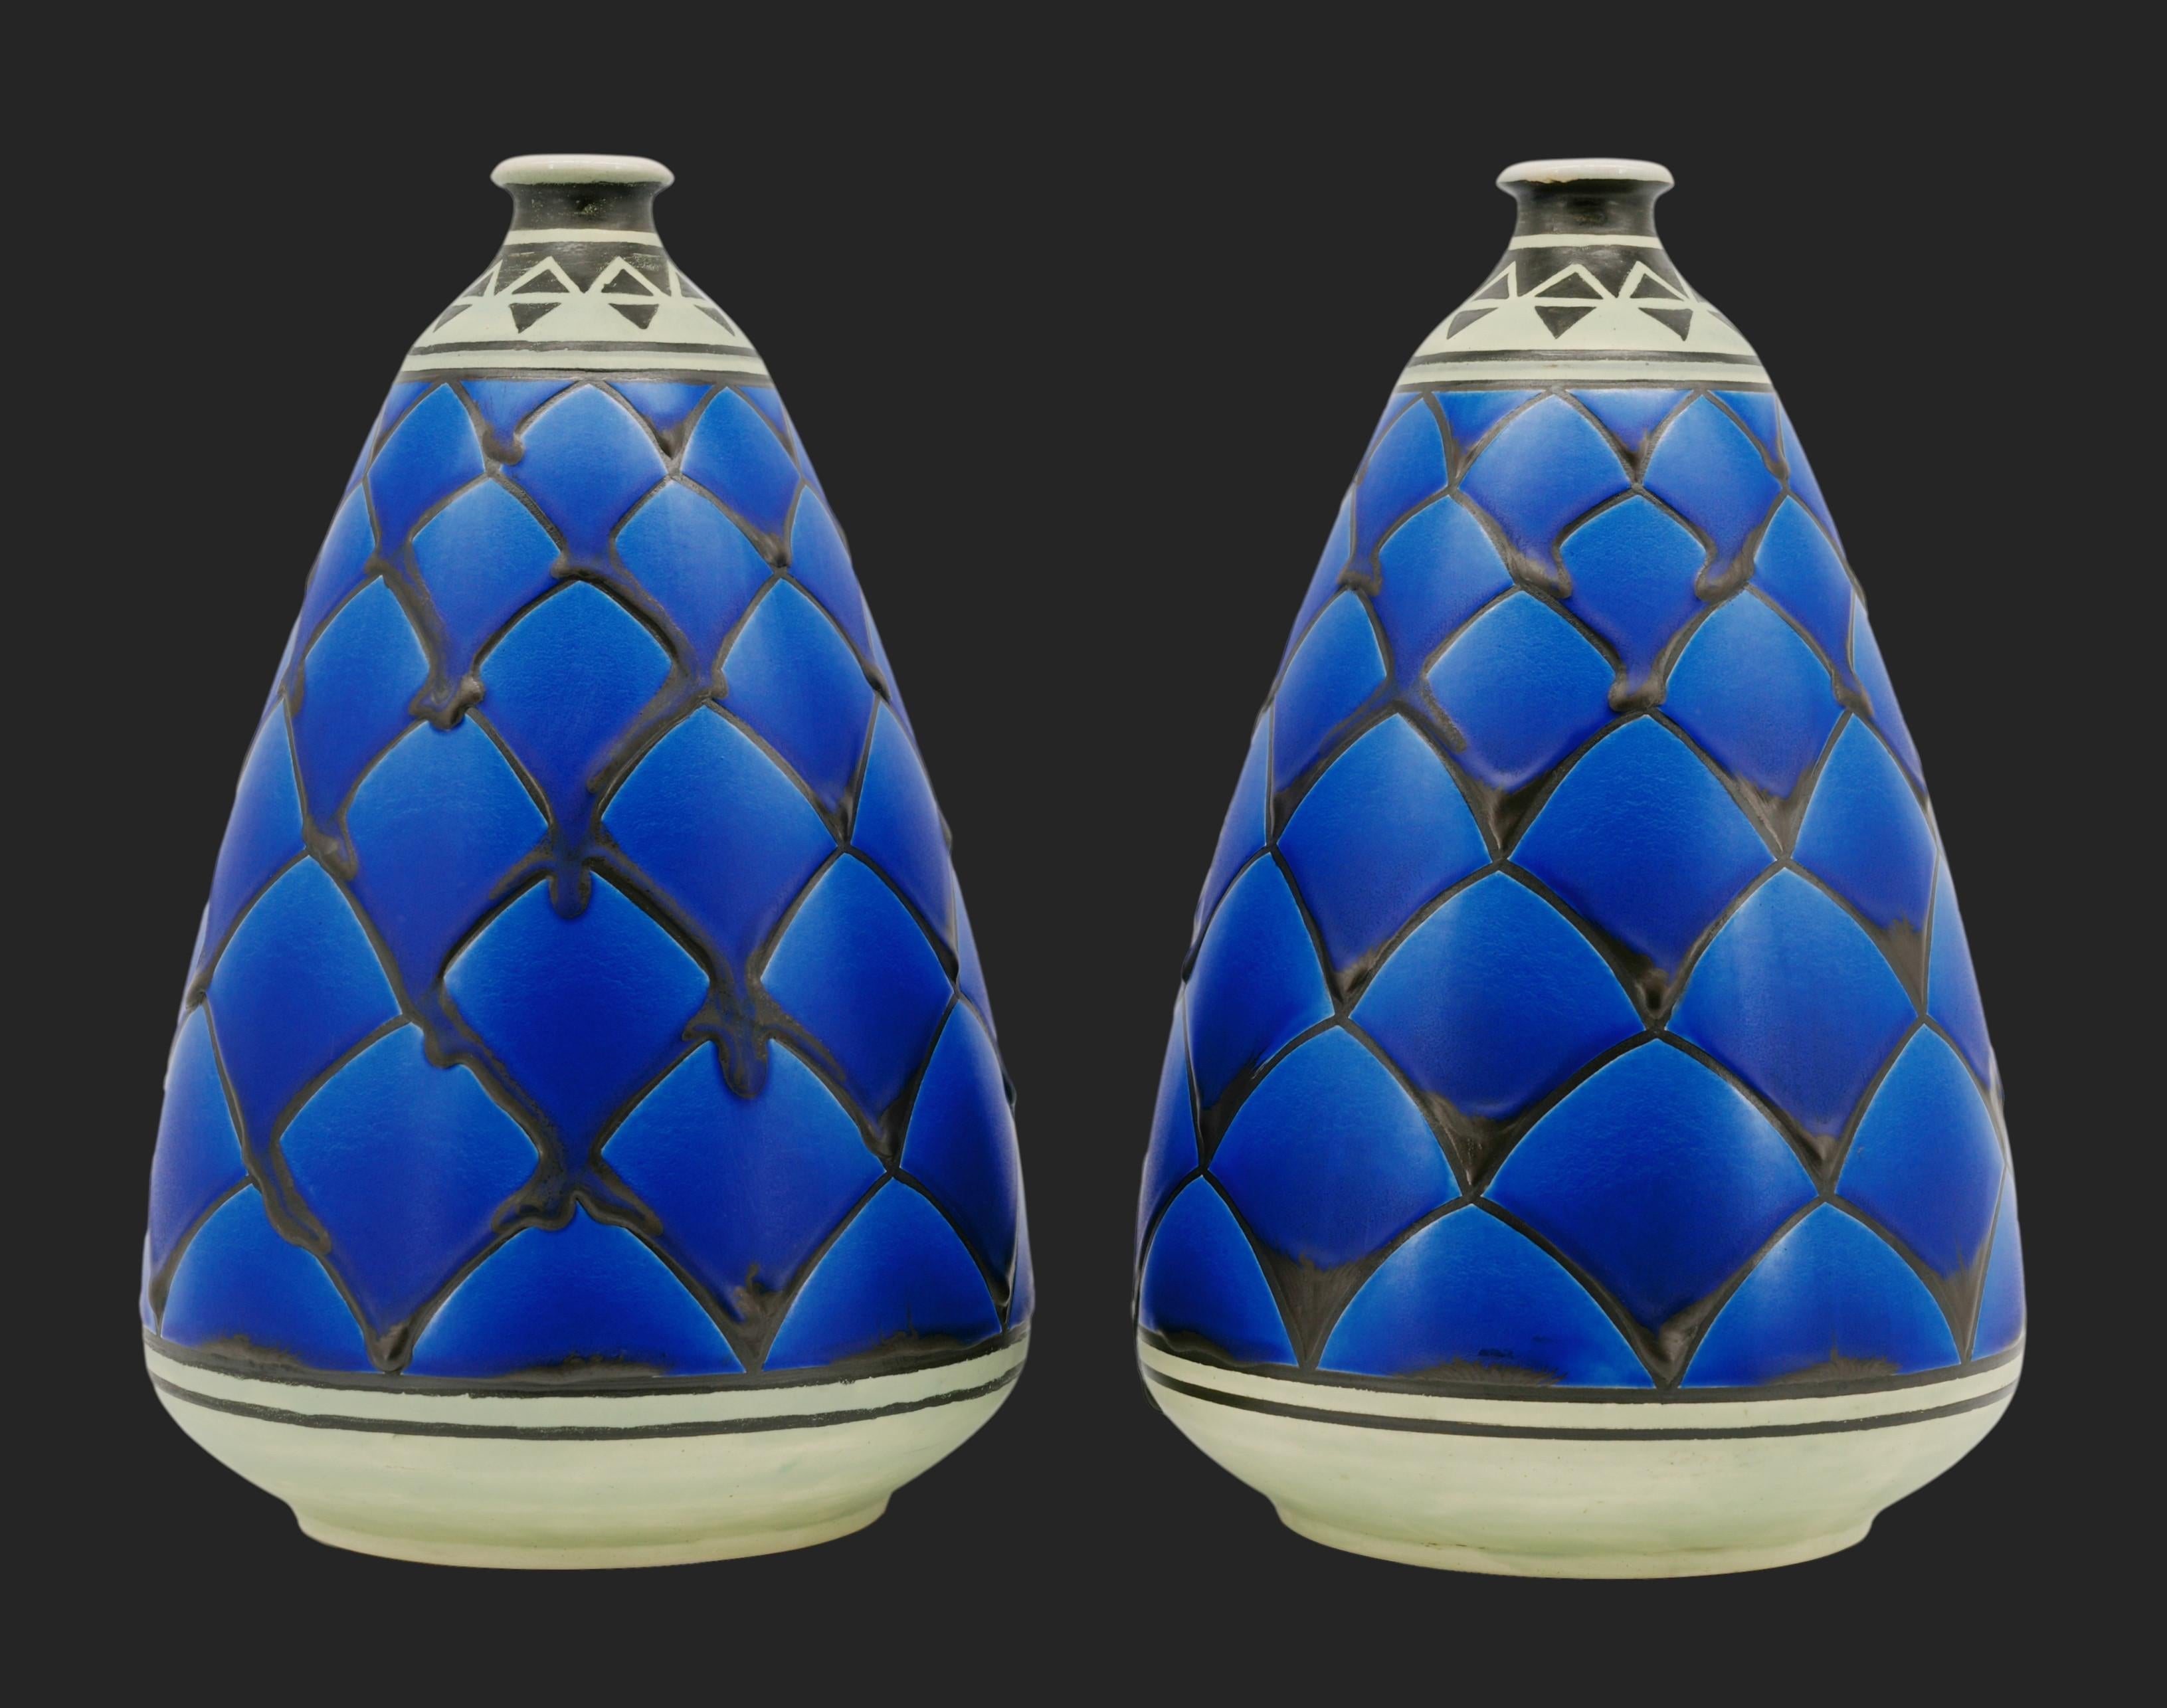 French Art Deco pair of ceramic vases by Moulin-des-Loups (Orchies - Hamage), France, ca.1930. Magnificent decoration of deep blue scales. Each - Height : 11.8